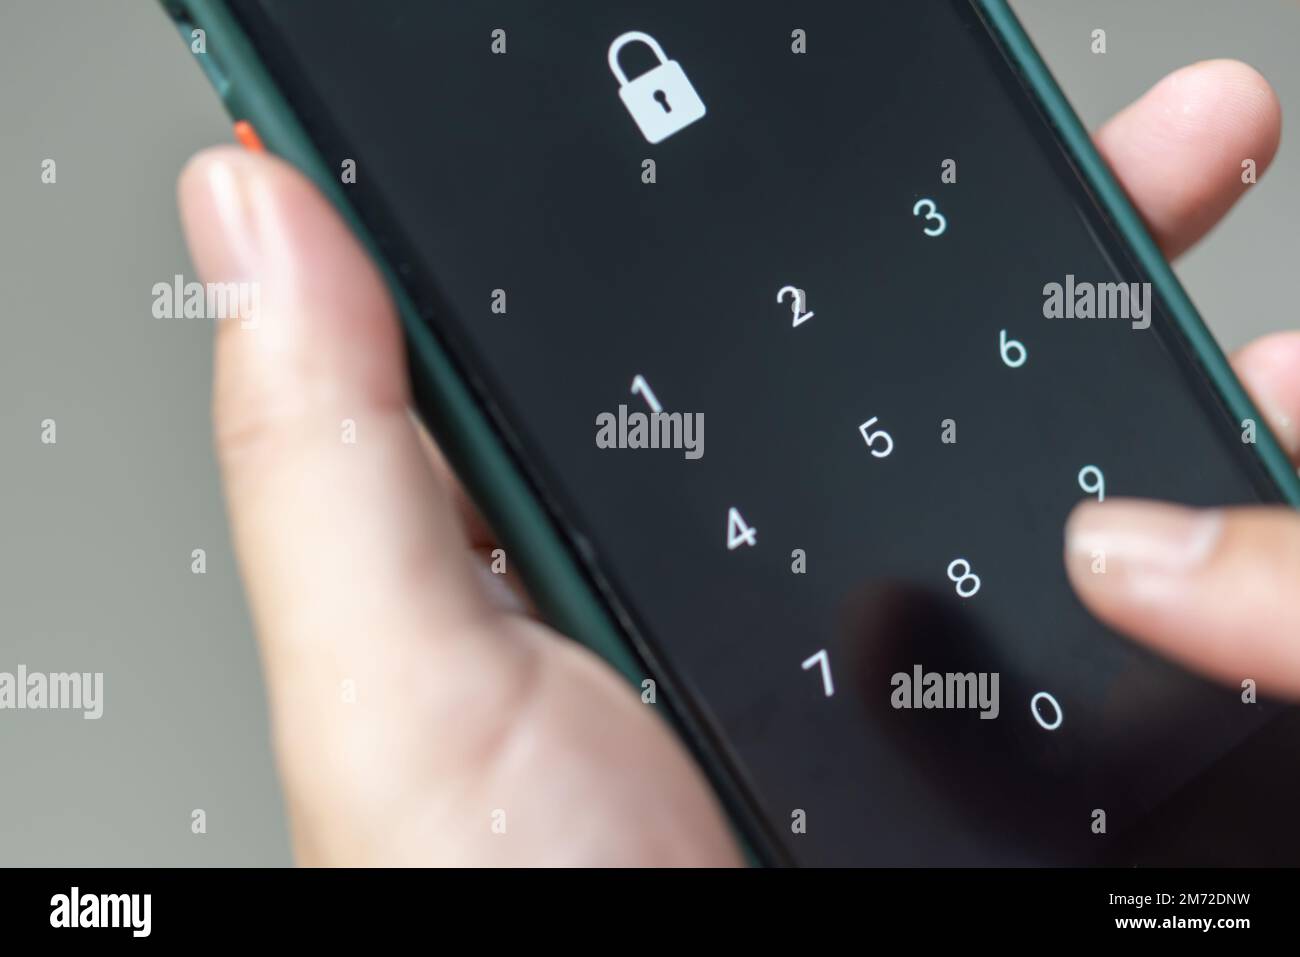 Hacking mobile phone with a password to access a smartphone, security threats online Phone lock code. Smartphone protection with 2fa Smartphone protec Stock Photo